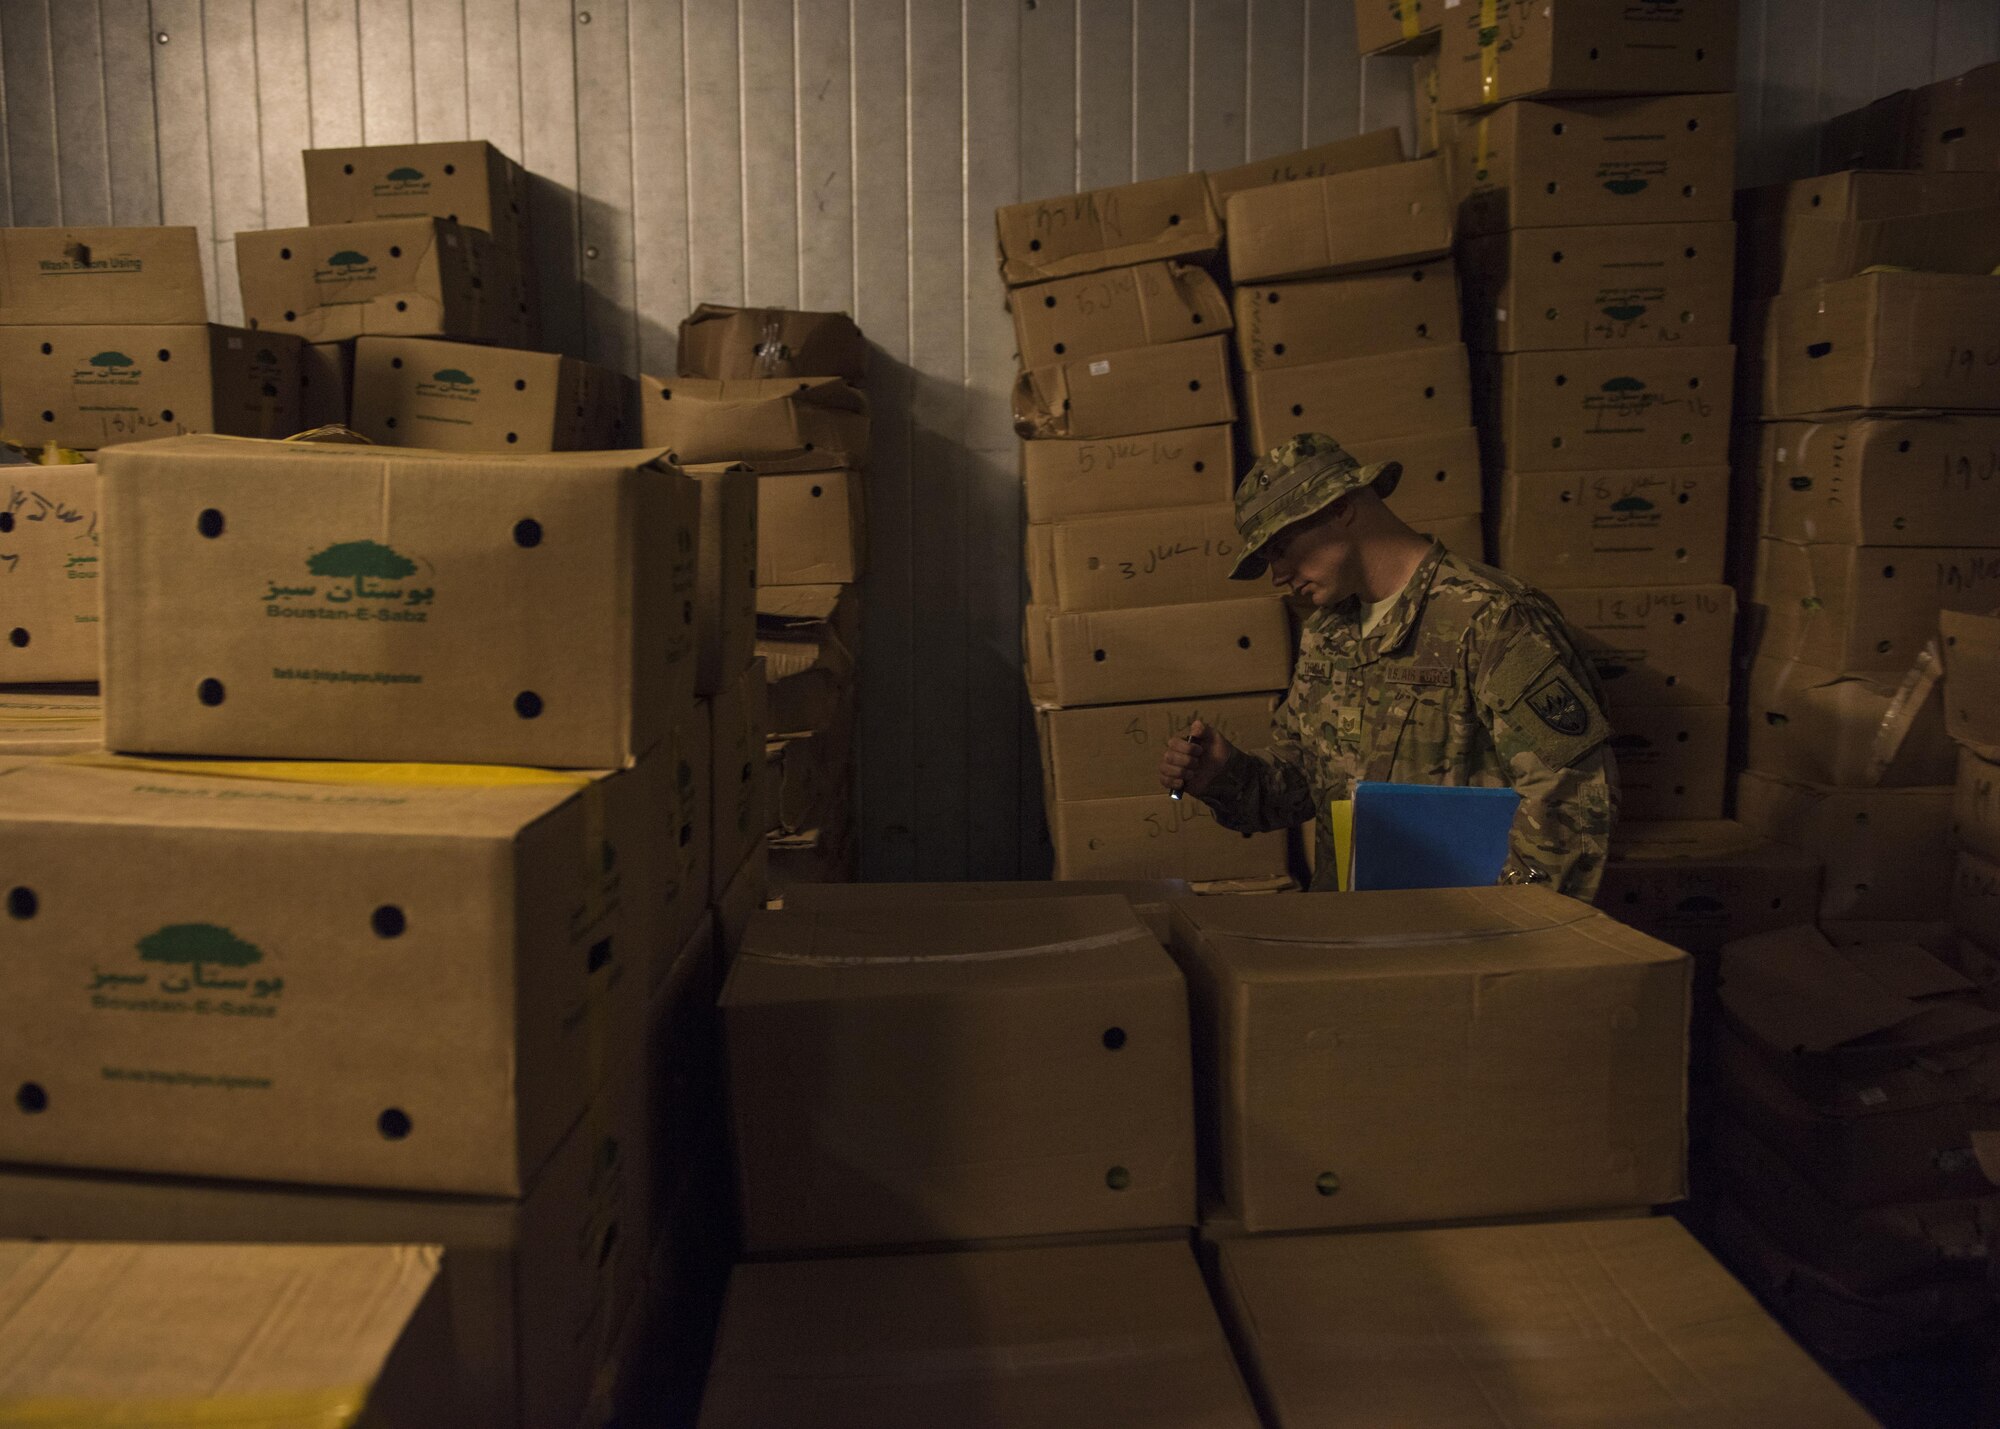 Tech Sgt. Rusty Thomas, 455th Expeditionary Medical Group public health technician, inspects a freezer, Bagram Airfield, Afghanistan, July 21, 2016. Thomas inspects public facilities to ensure that they are sanitary, and comply with food code standards. (U.S. Air Force photo by Senior Airman Justyn M. Freeman)